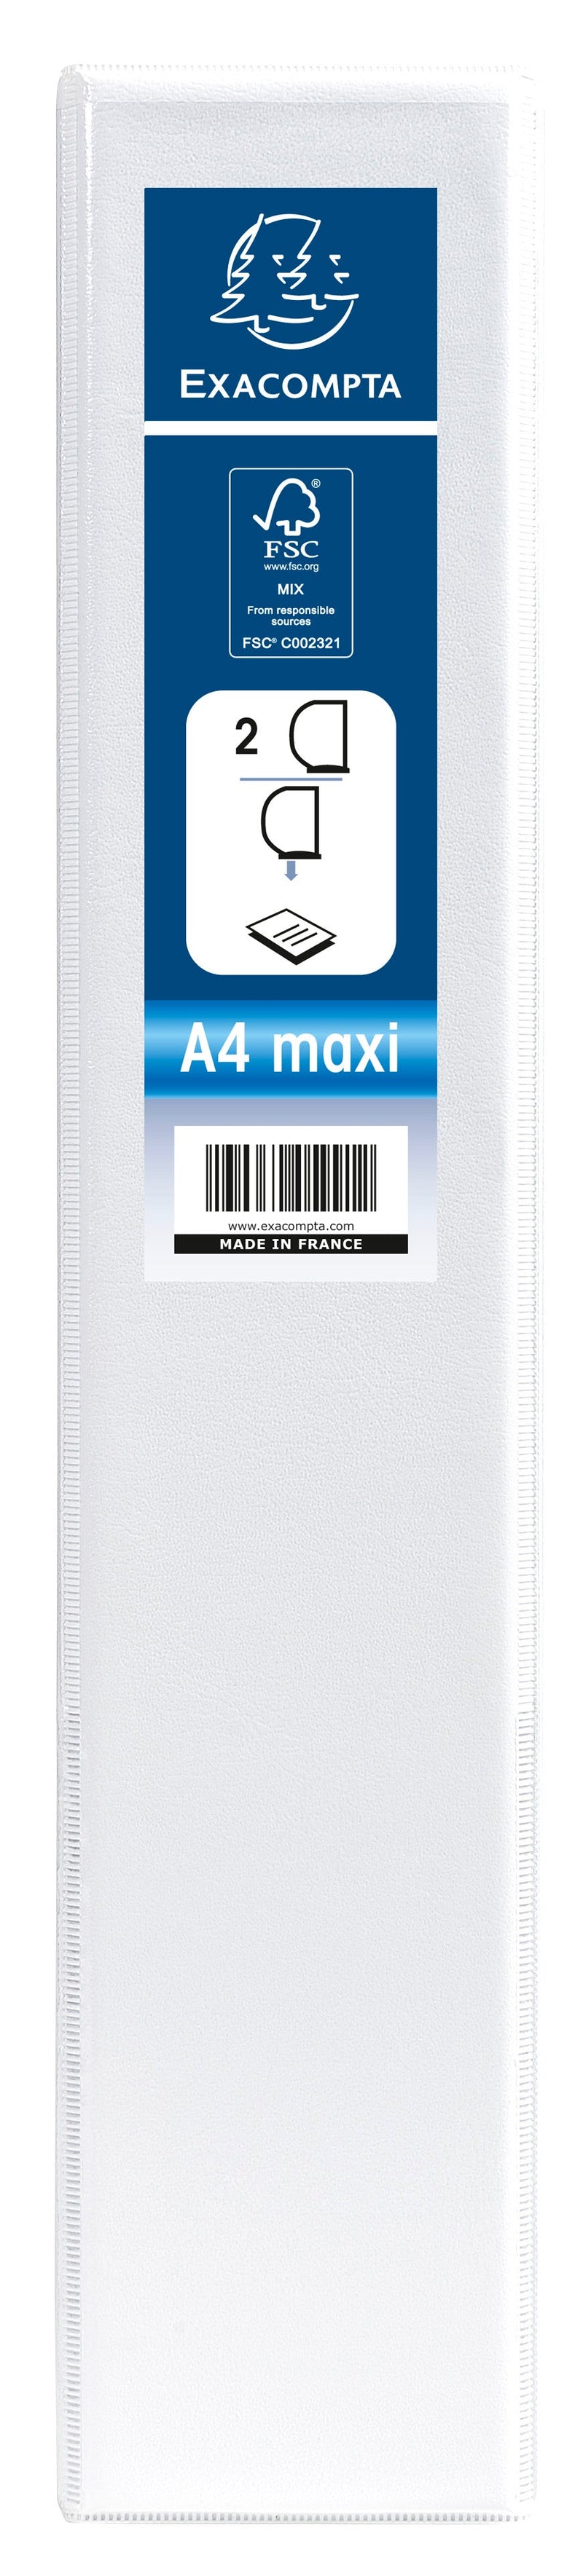 ValueX Presentation Ring Binder PVC 2 D-Ring A4 40mm Rings White (Pack 10) - 51823E - ONE CLICK SUPPLIES